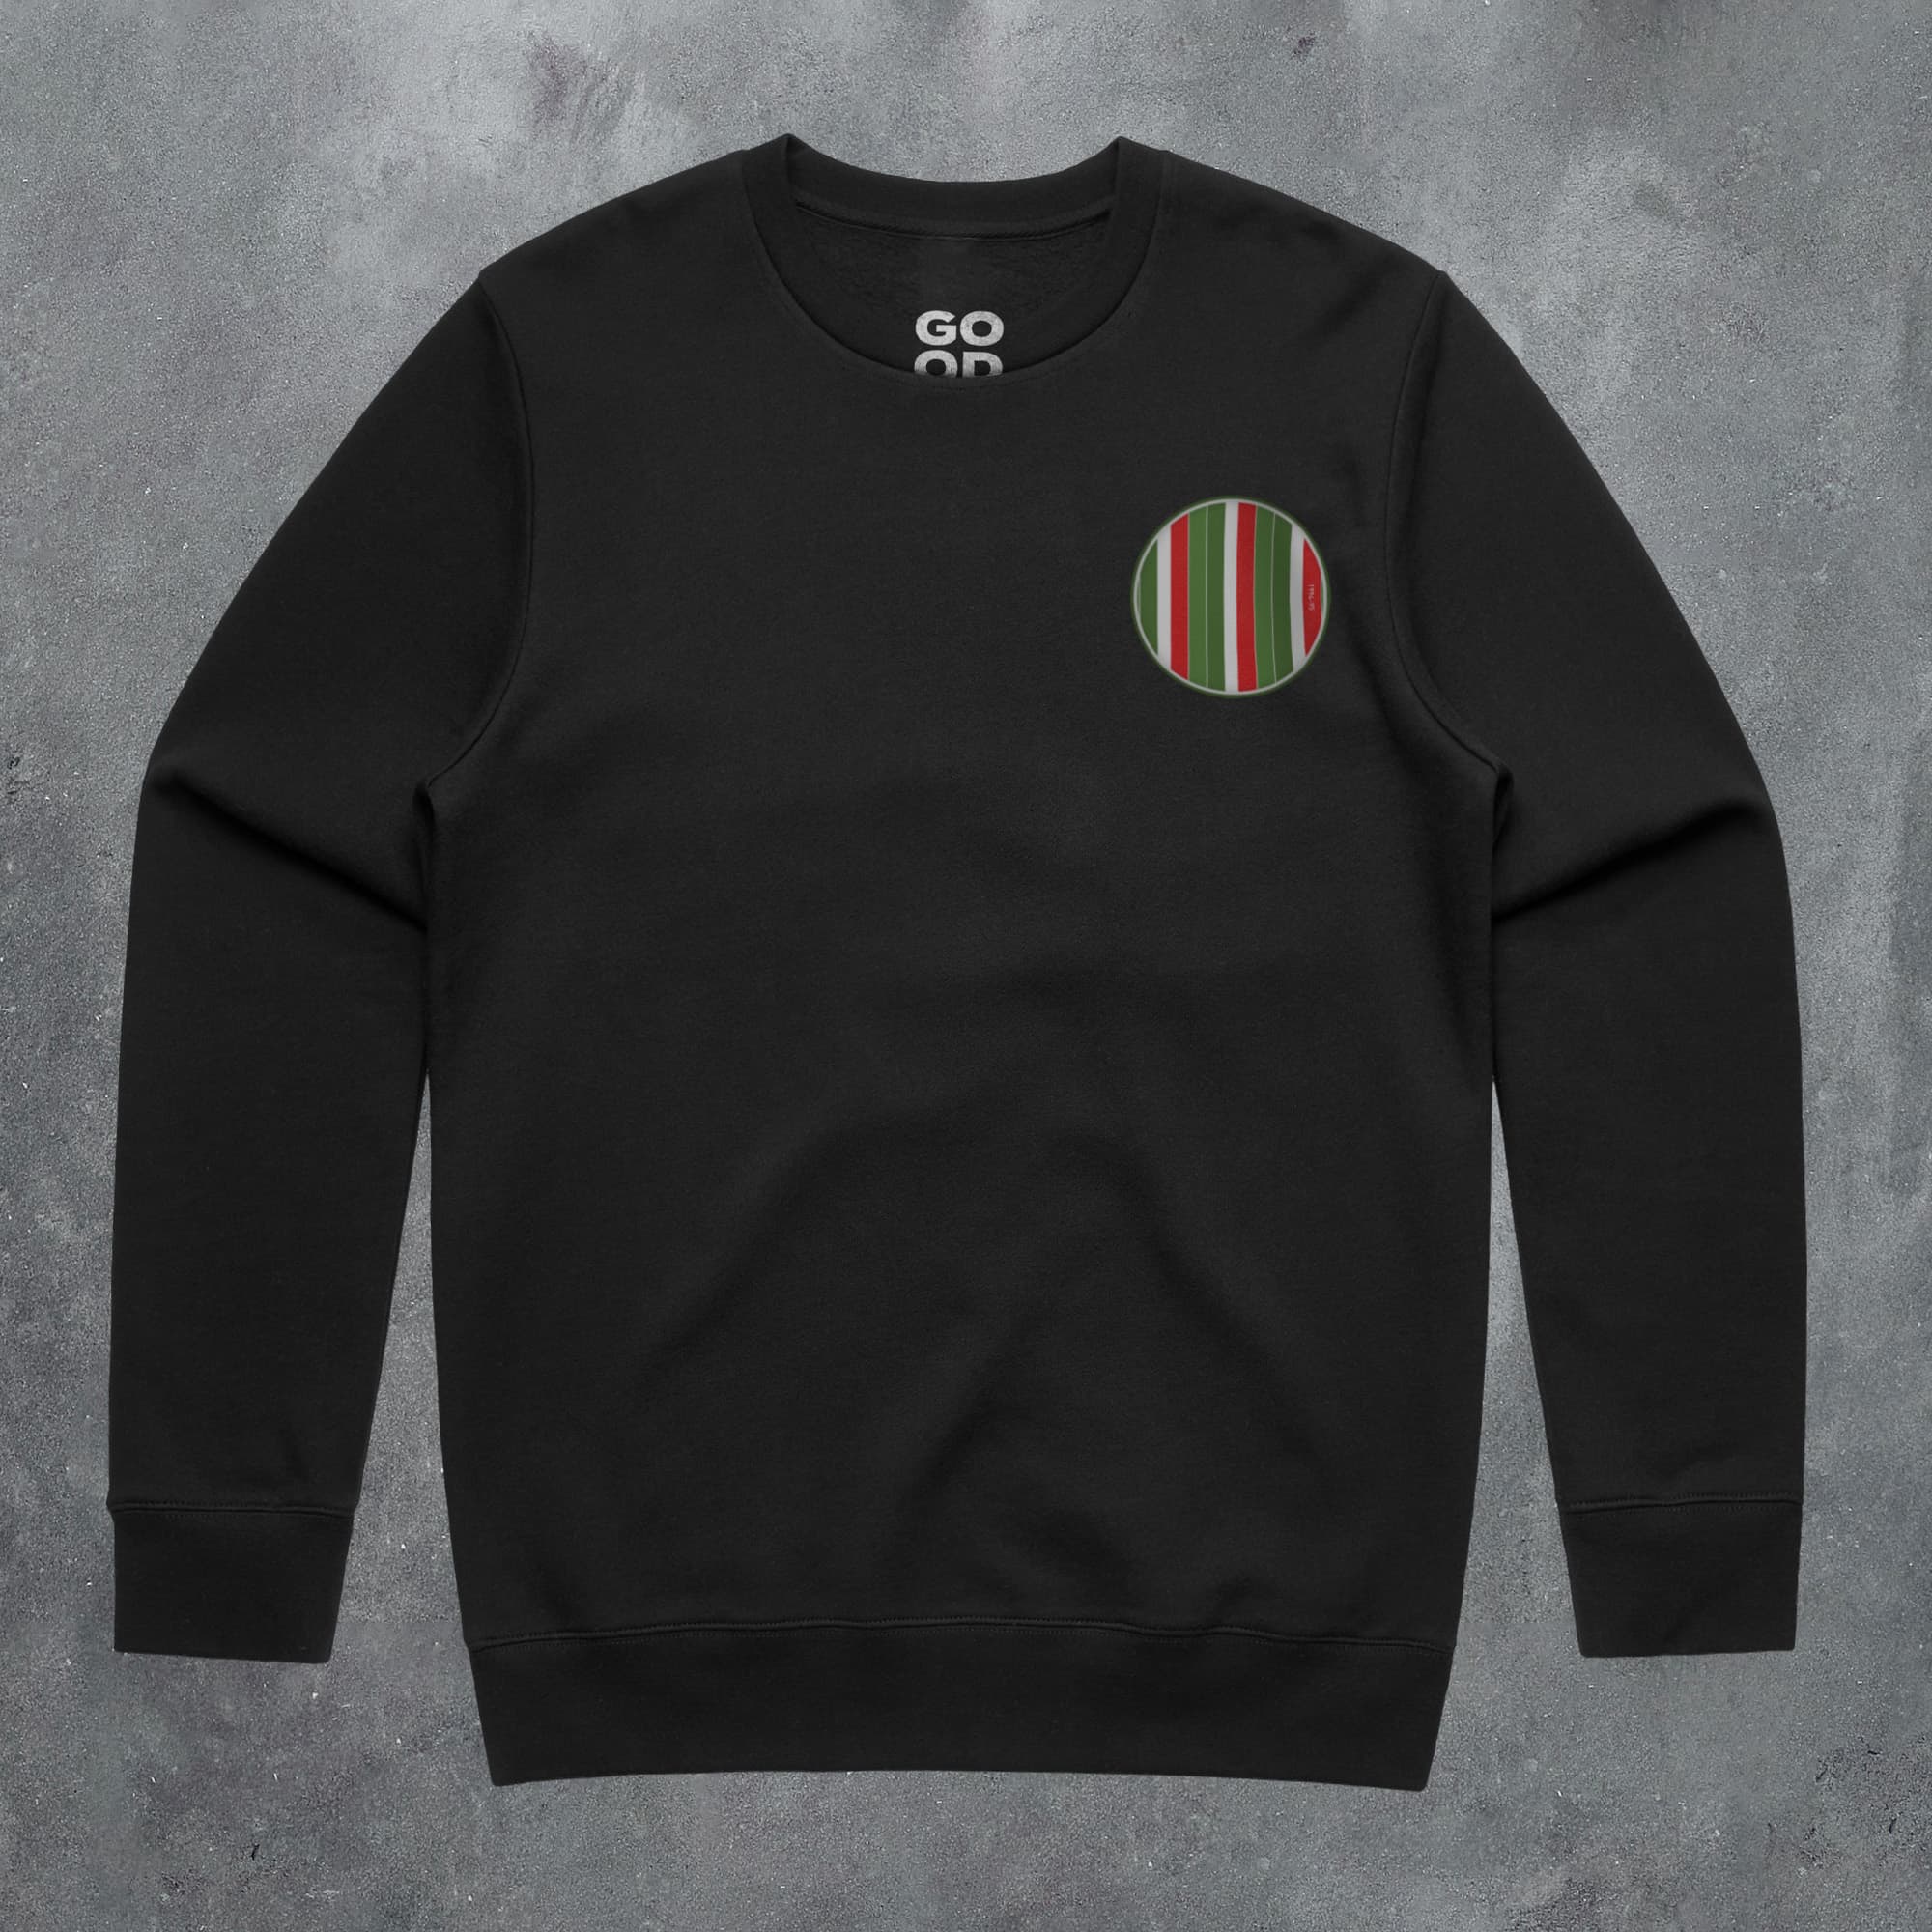 a black sweatshirt with a red, white, and green striped pocket